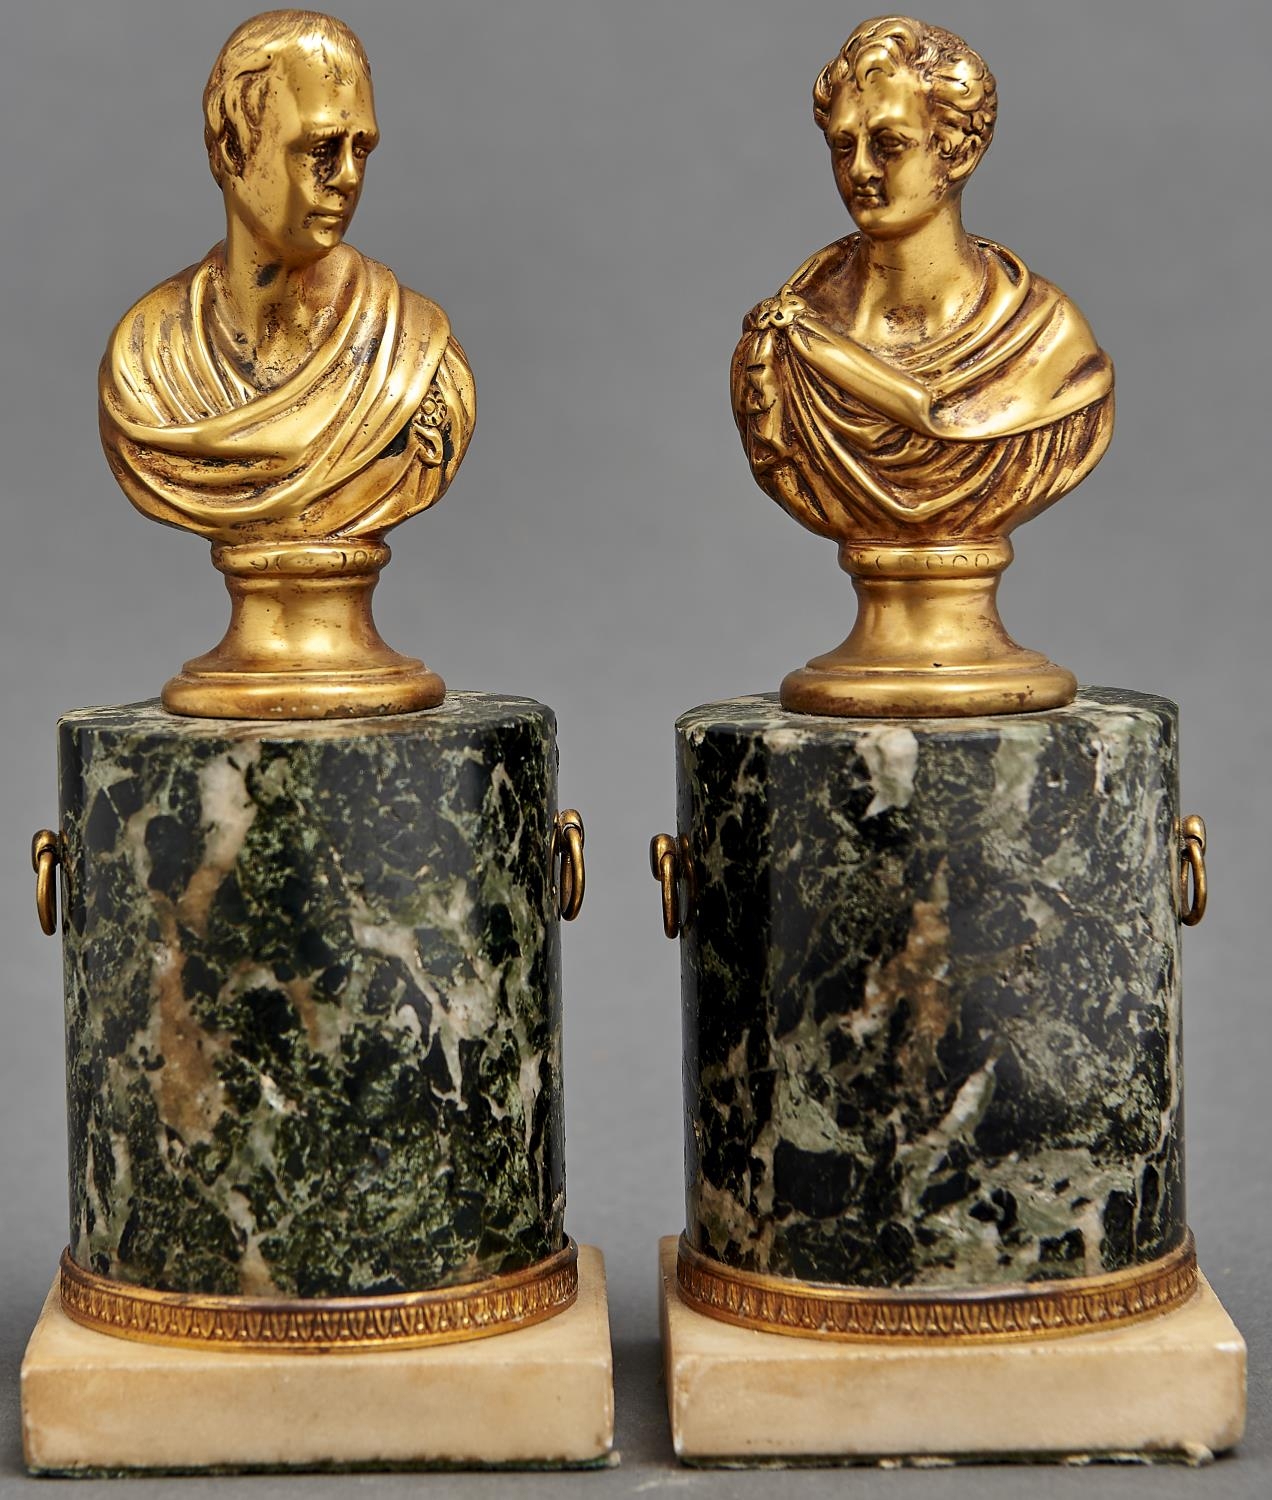 A pair of gilt bronze portrait busts of Lord Byron and Sir Walter Scott, 19th c, a l'antica, on